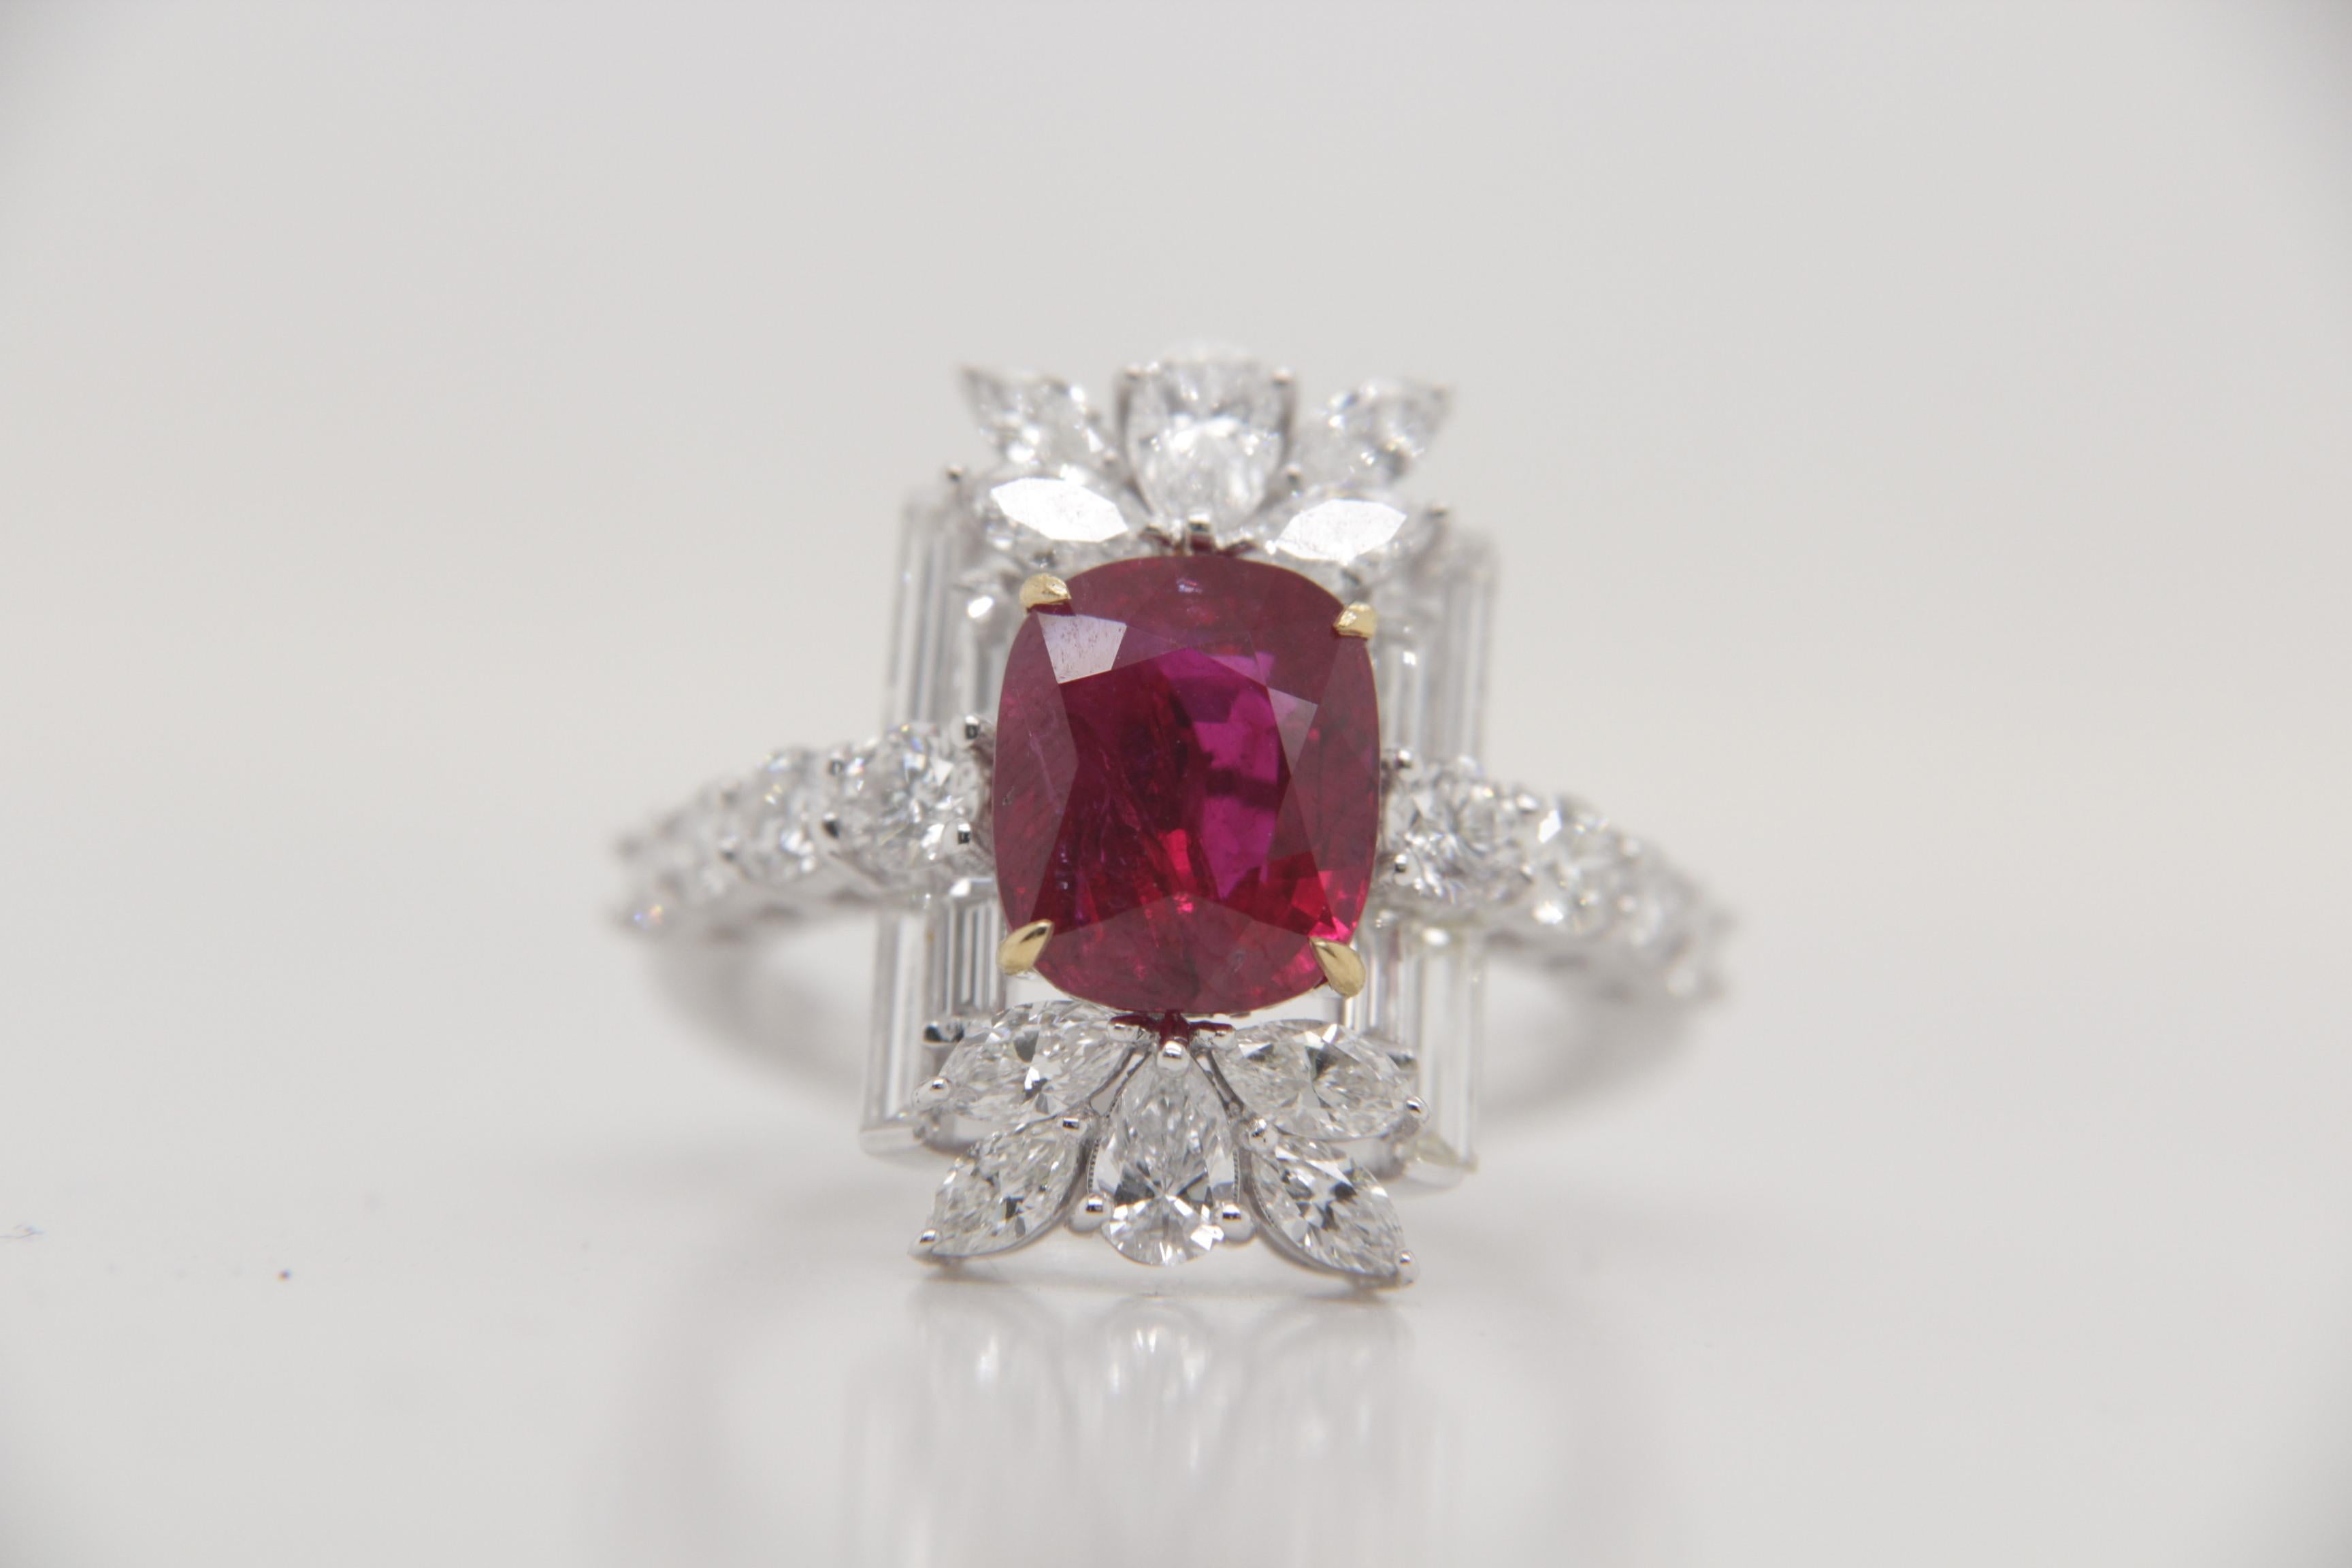 A brand new handcrafted ruby ring by Rewa Jewels. The ring's center stone is 3.38 carat Burmese ruby certified by Gem Research Swisslab (GRS) as natural, unheated, 'Pigeon blood' with the certificate number: 2023-101135. The centre ruby has been set